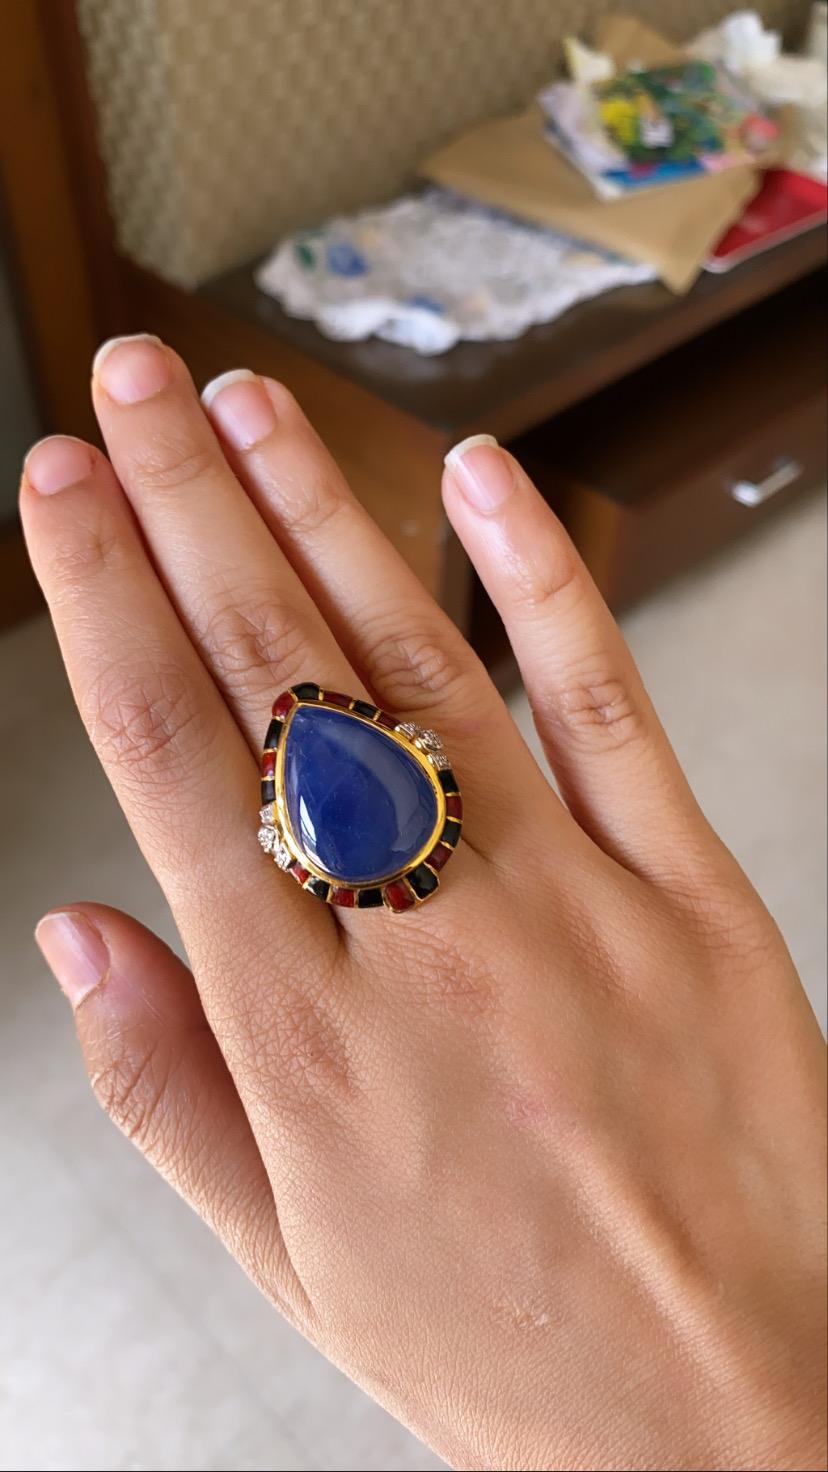 A modern enamel ring set in 18k yellow gold with black and red enamel and natural blue sapphire cabochon. The blue sapphire is natural and originates from Burma and weight approx 35.76 carats, diamond weight is .16 carats . The net gold weight is